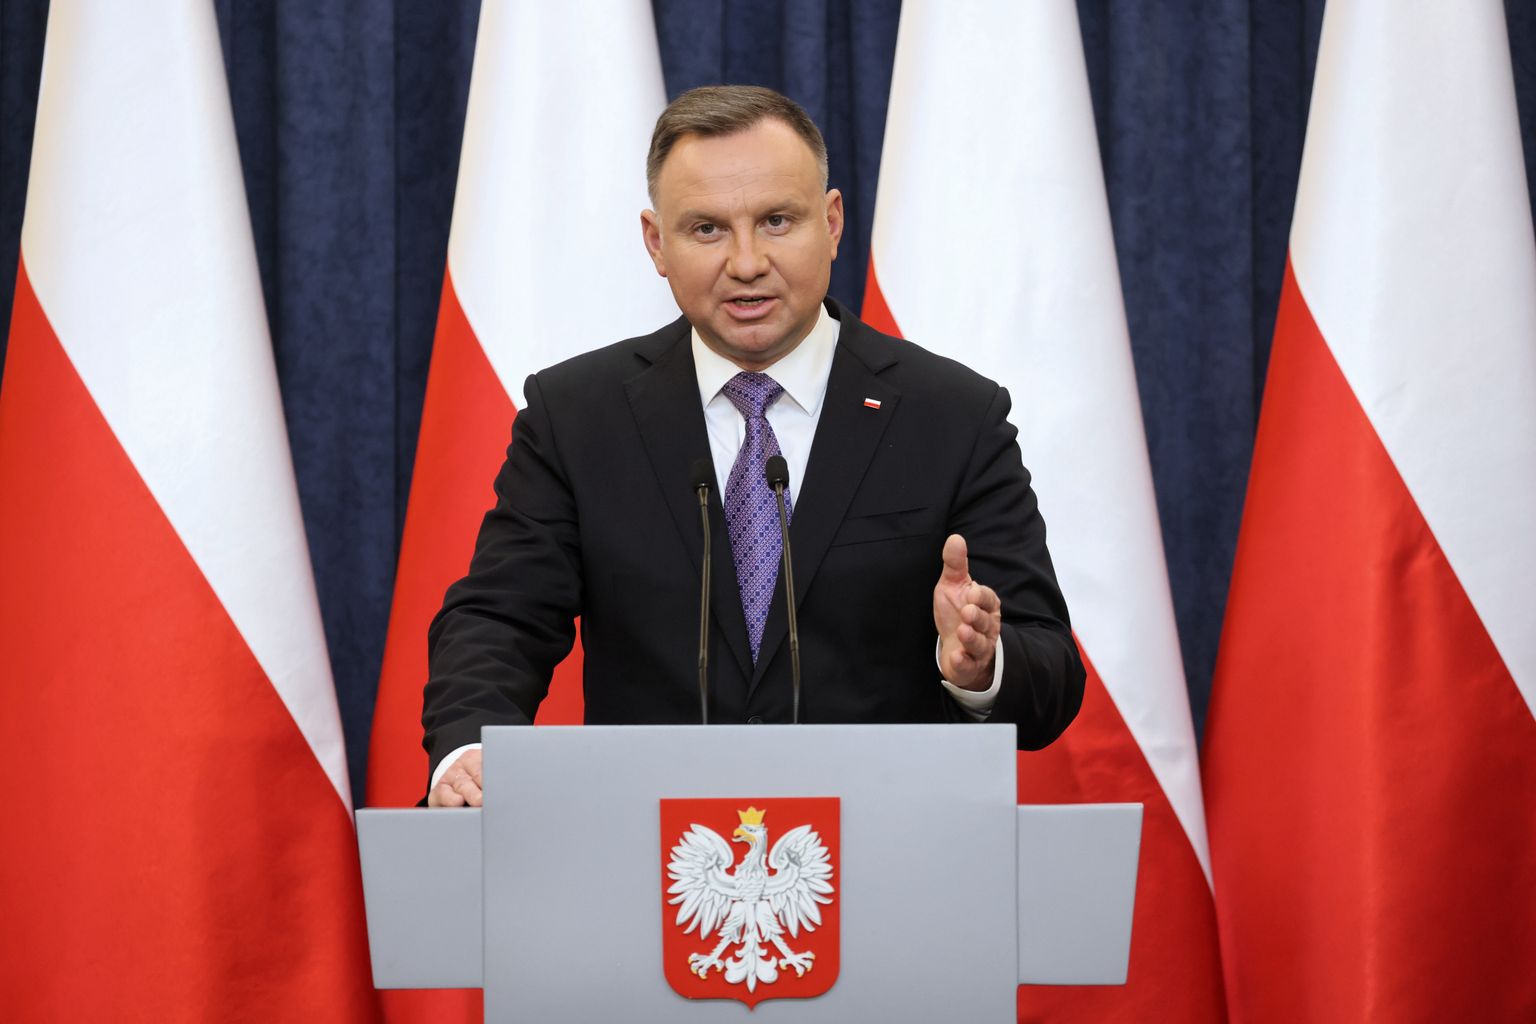 epa09759690 Polish President Andrzej Duda speaks during a press conference at the Presidential Palace in Warsaw, Poland, 15 February 2022. The Polish president met with cabinet ministers on the day to discuss potential developments in case Russia will decide to escalate its conflict with Ukraine. 'We have discussed the situation because we need to assume different scenarios and we've just discussed those different scenarios of what may happen in Ukraine, around Ukraine and of course in Belarus, which now hosts Russian military forces', Duda said. The discussion also covered the problem of potential refugees from Ukraine in the event of a military conflict.  EPA/LESZEK SZYMANSKI POLAND OUT